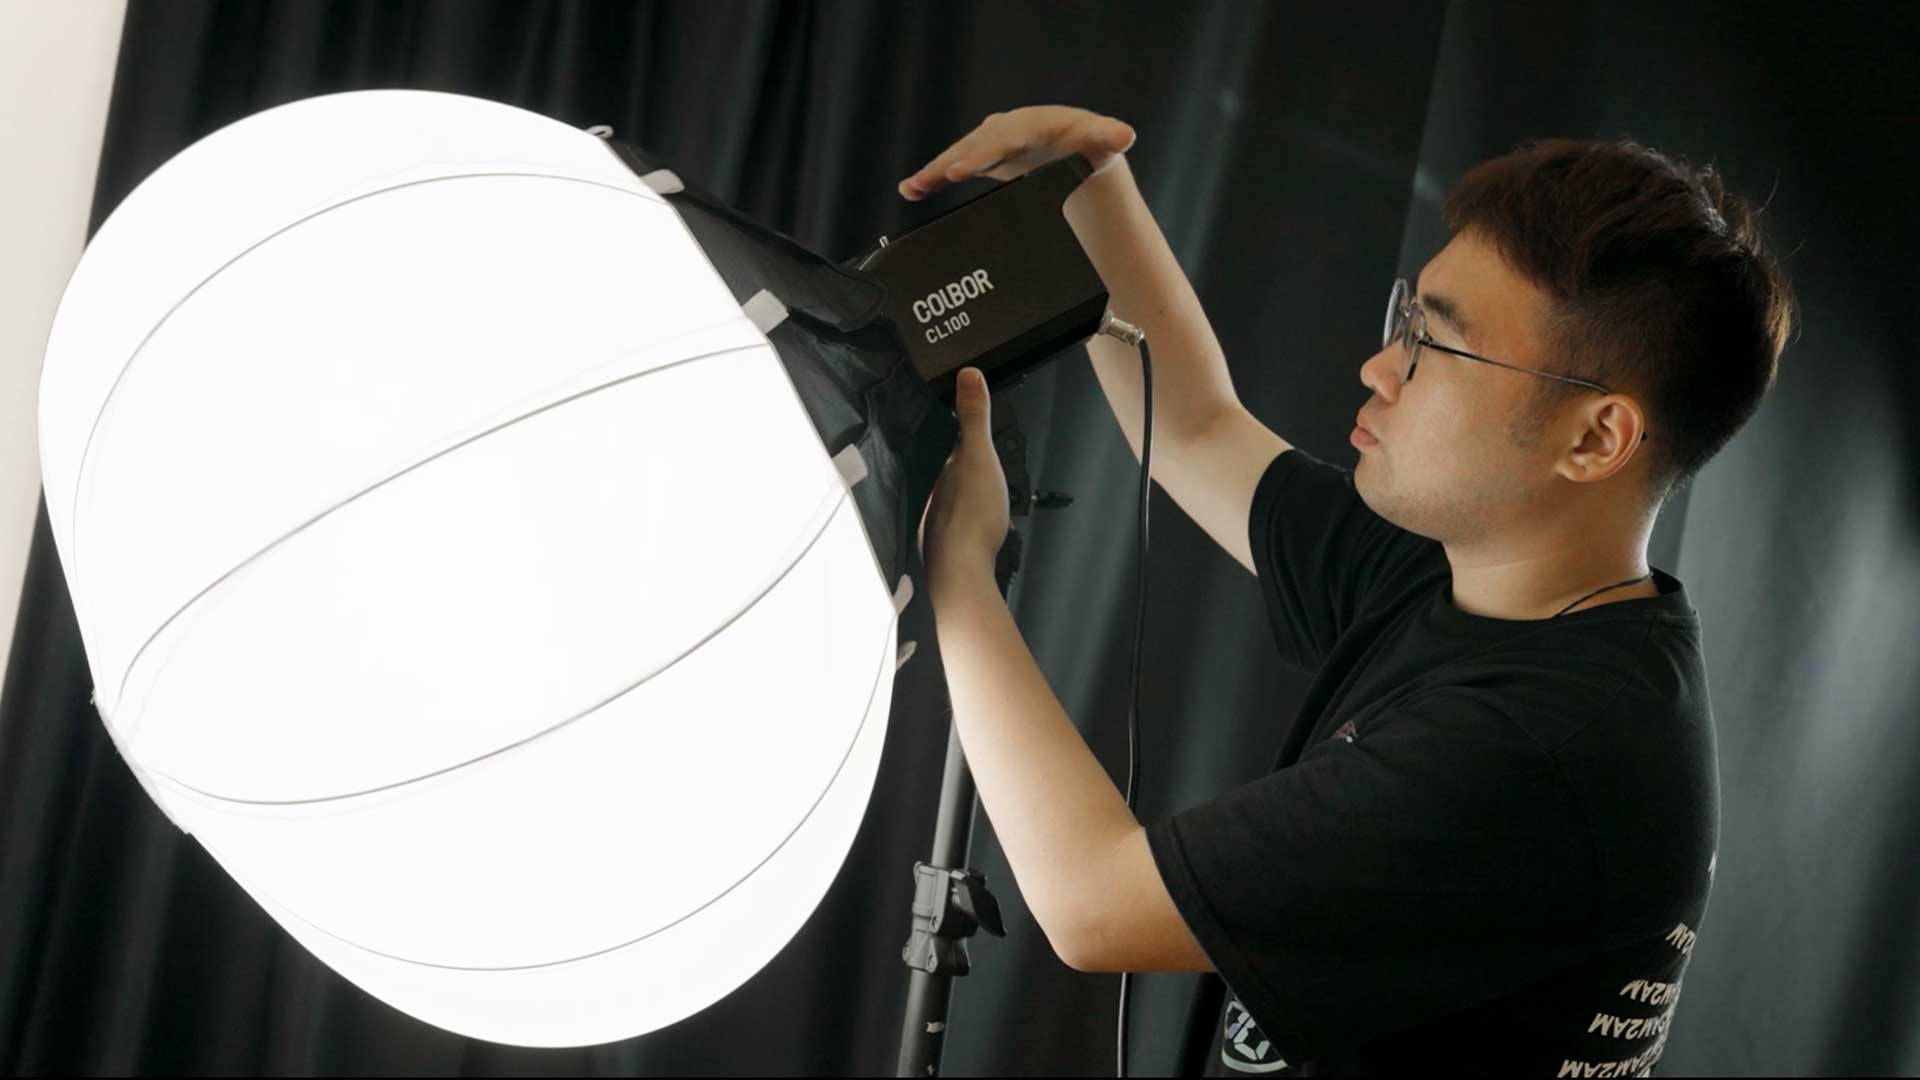 COLBOR CL100 is one of the LED lights for photography studio.